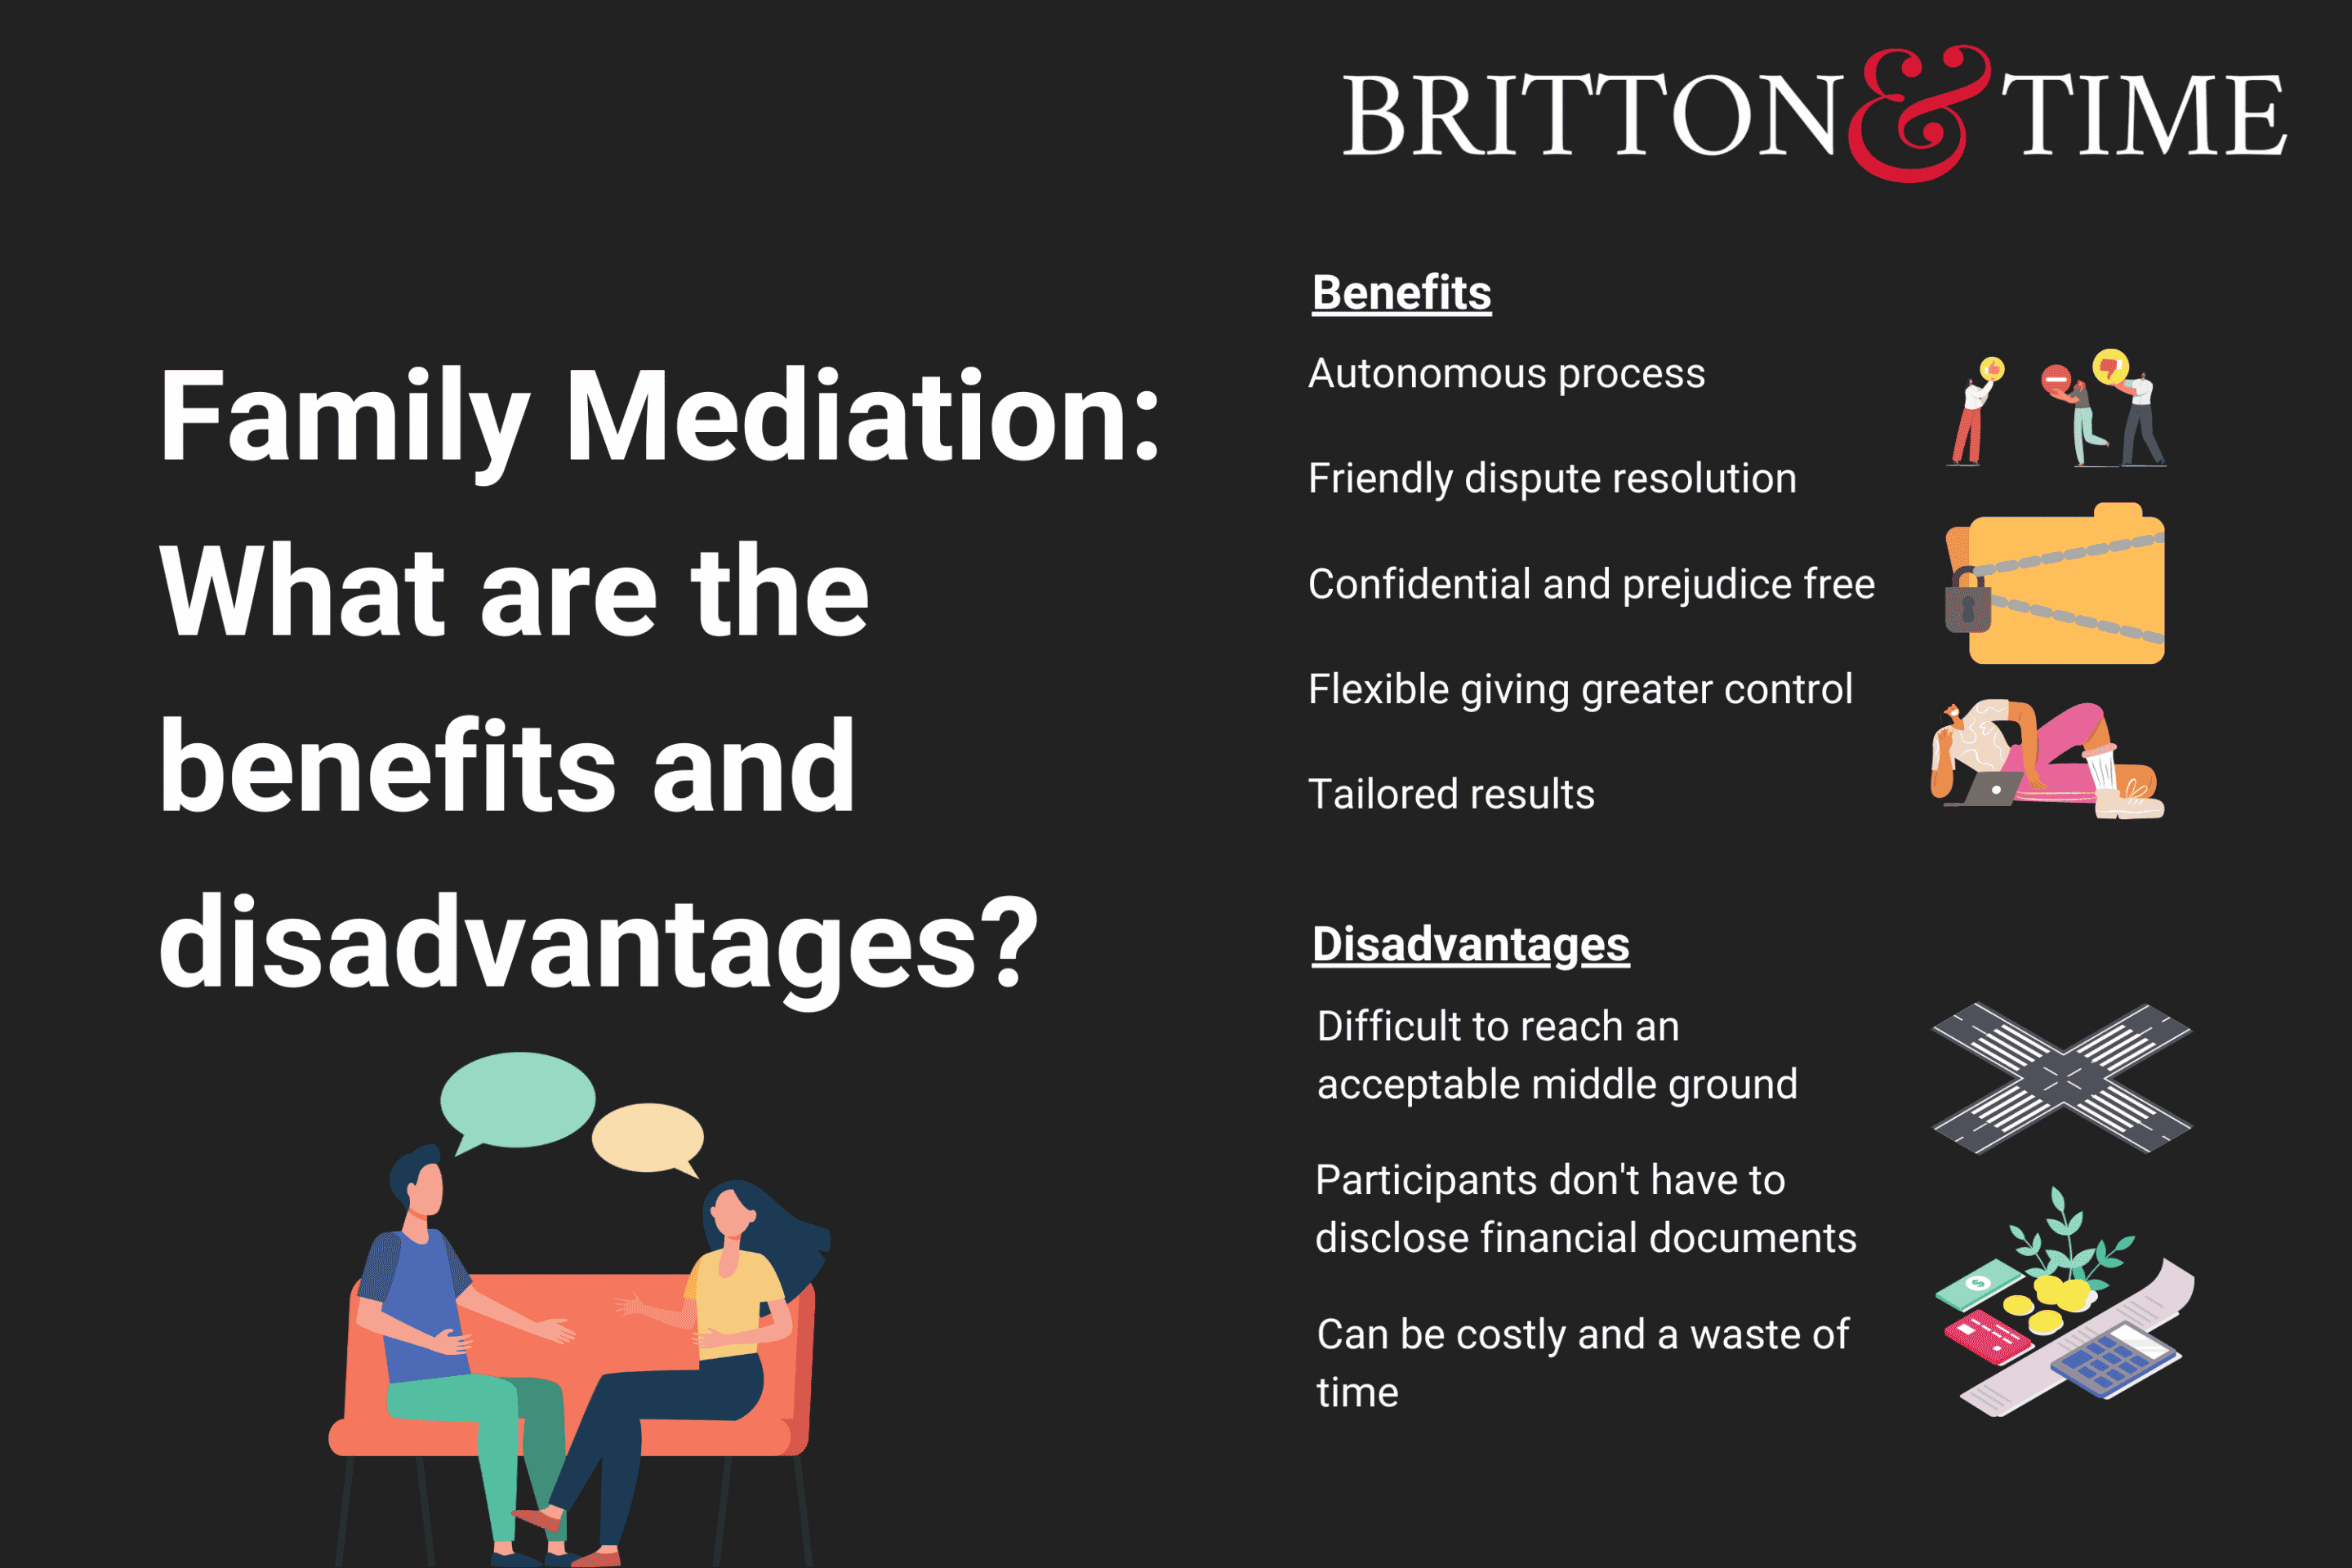 Family mediation benefits and disadvantages